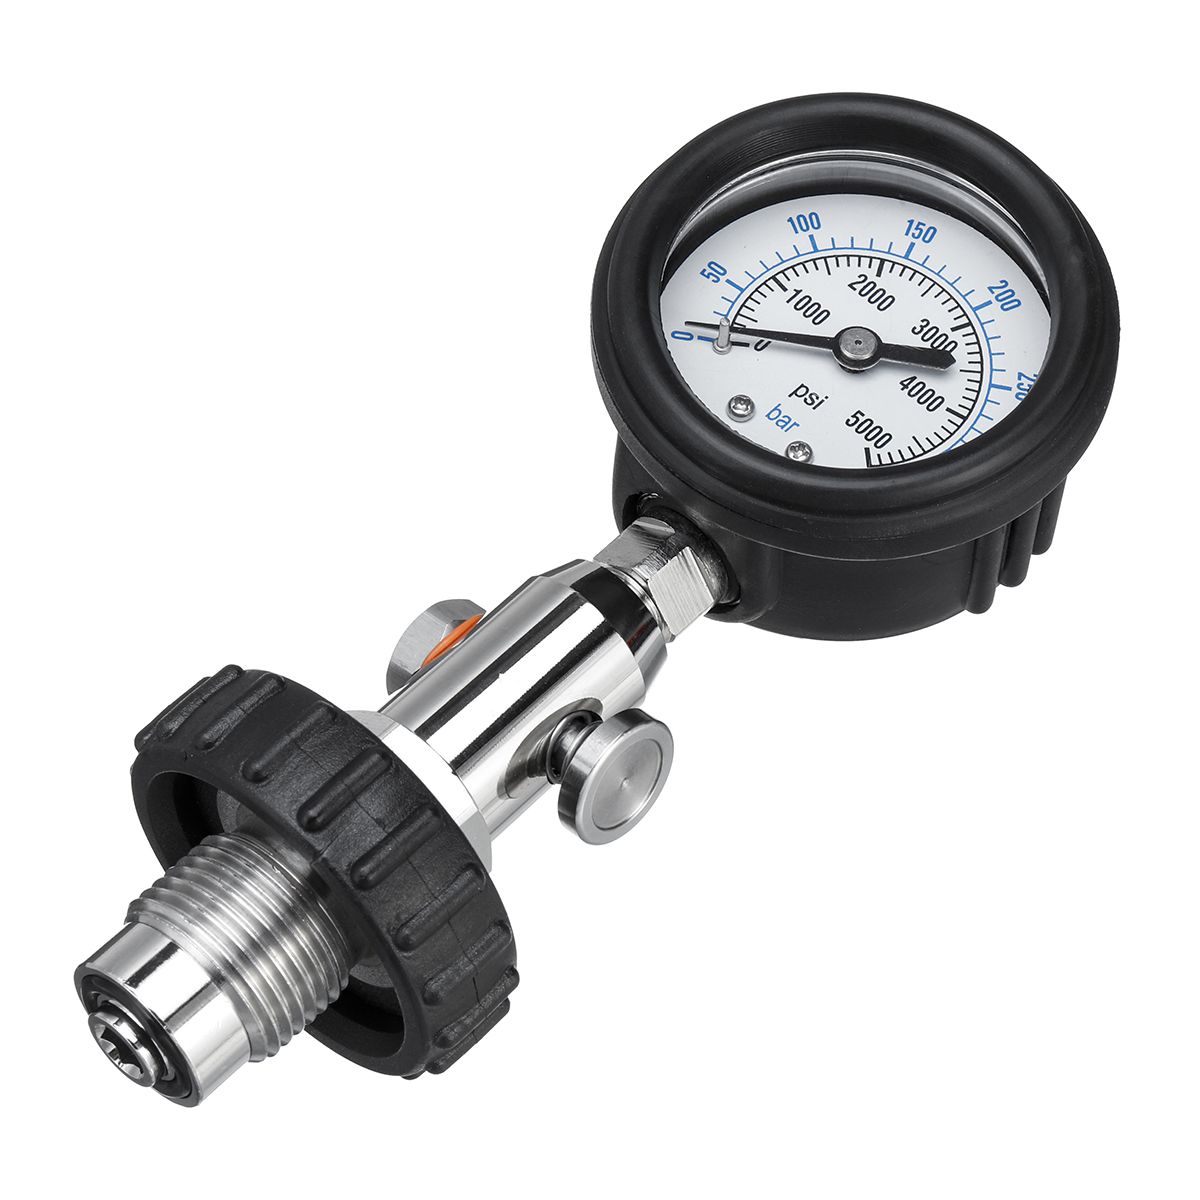 350-BAR-Axial-Hydraulic-Pressure-Gauge-Test-40MPa-6000PSI-Stainless-Steel-Indicator-1649890